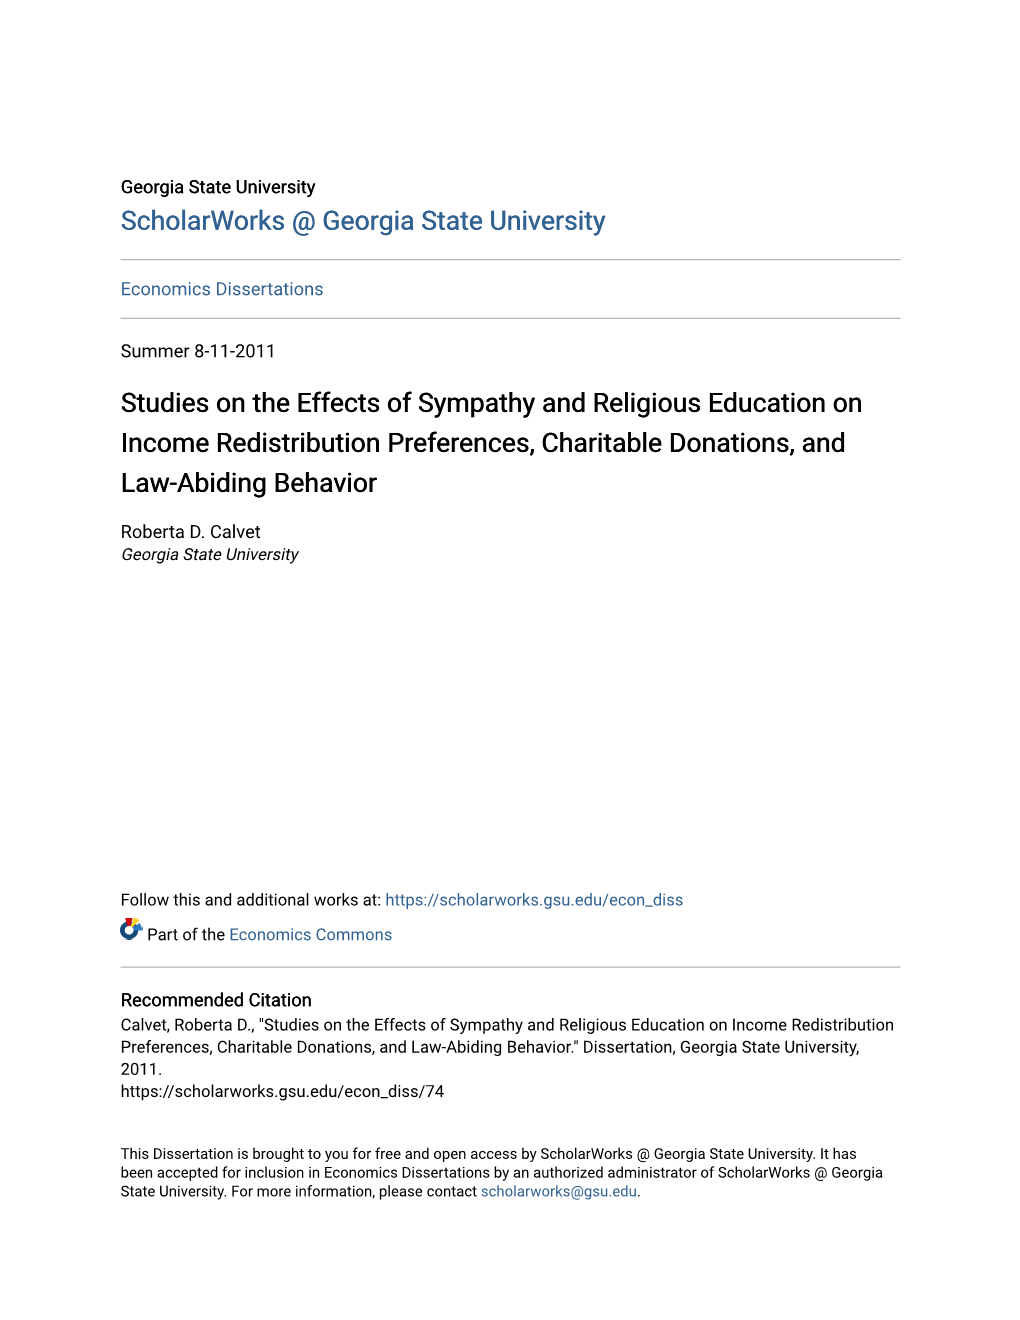 Studies on the Effects of Sympathy and Religious Education on Income Redistribution Preferences, Charitable Donations, and Law-Abiding Behavior